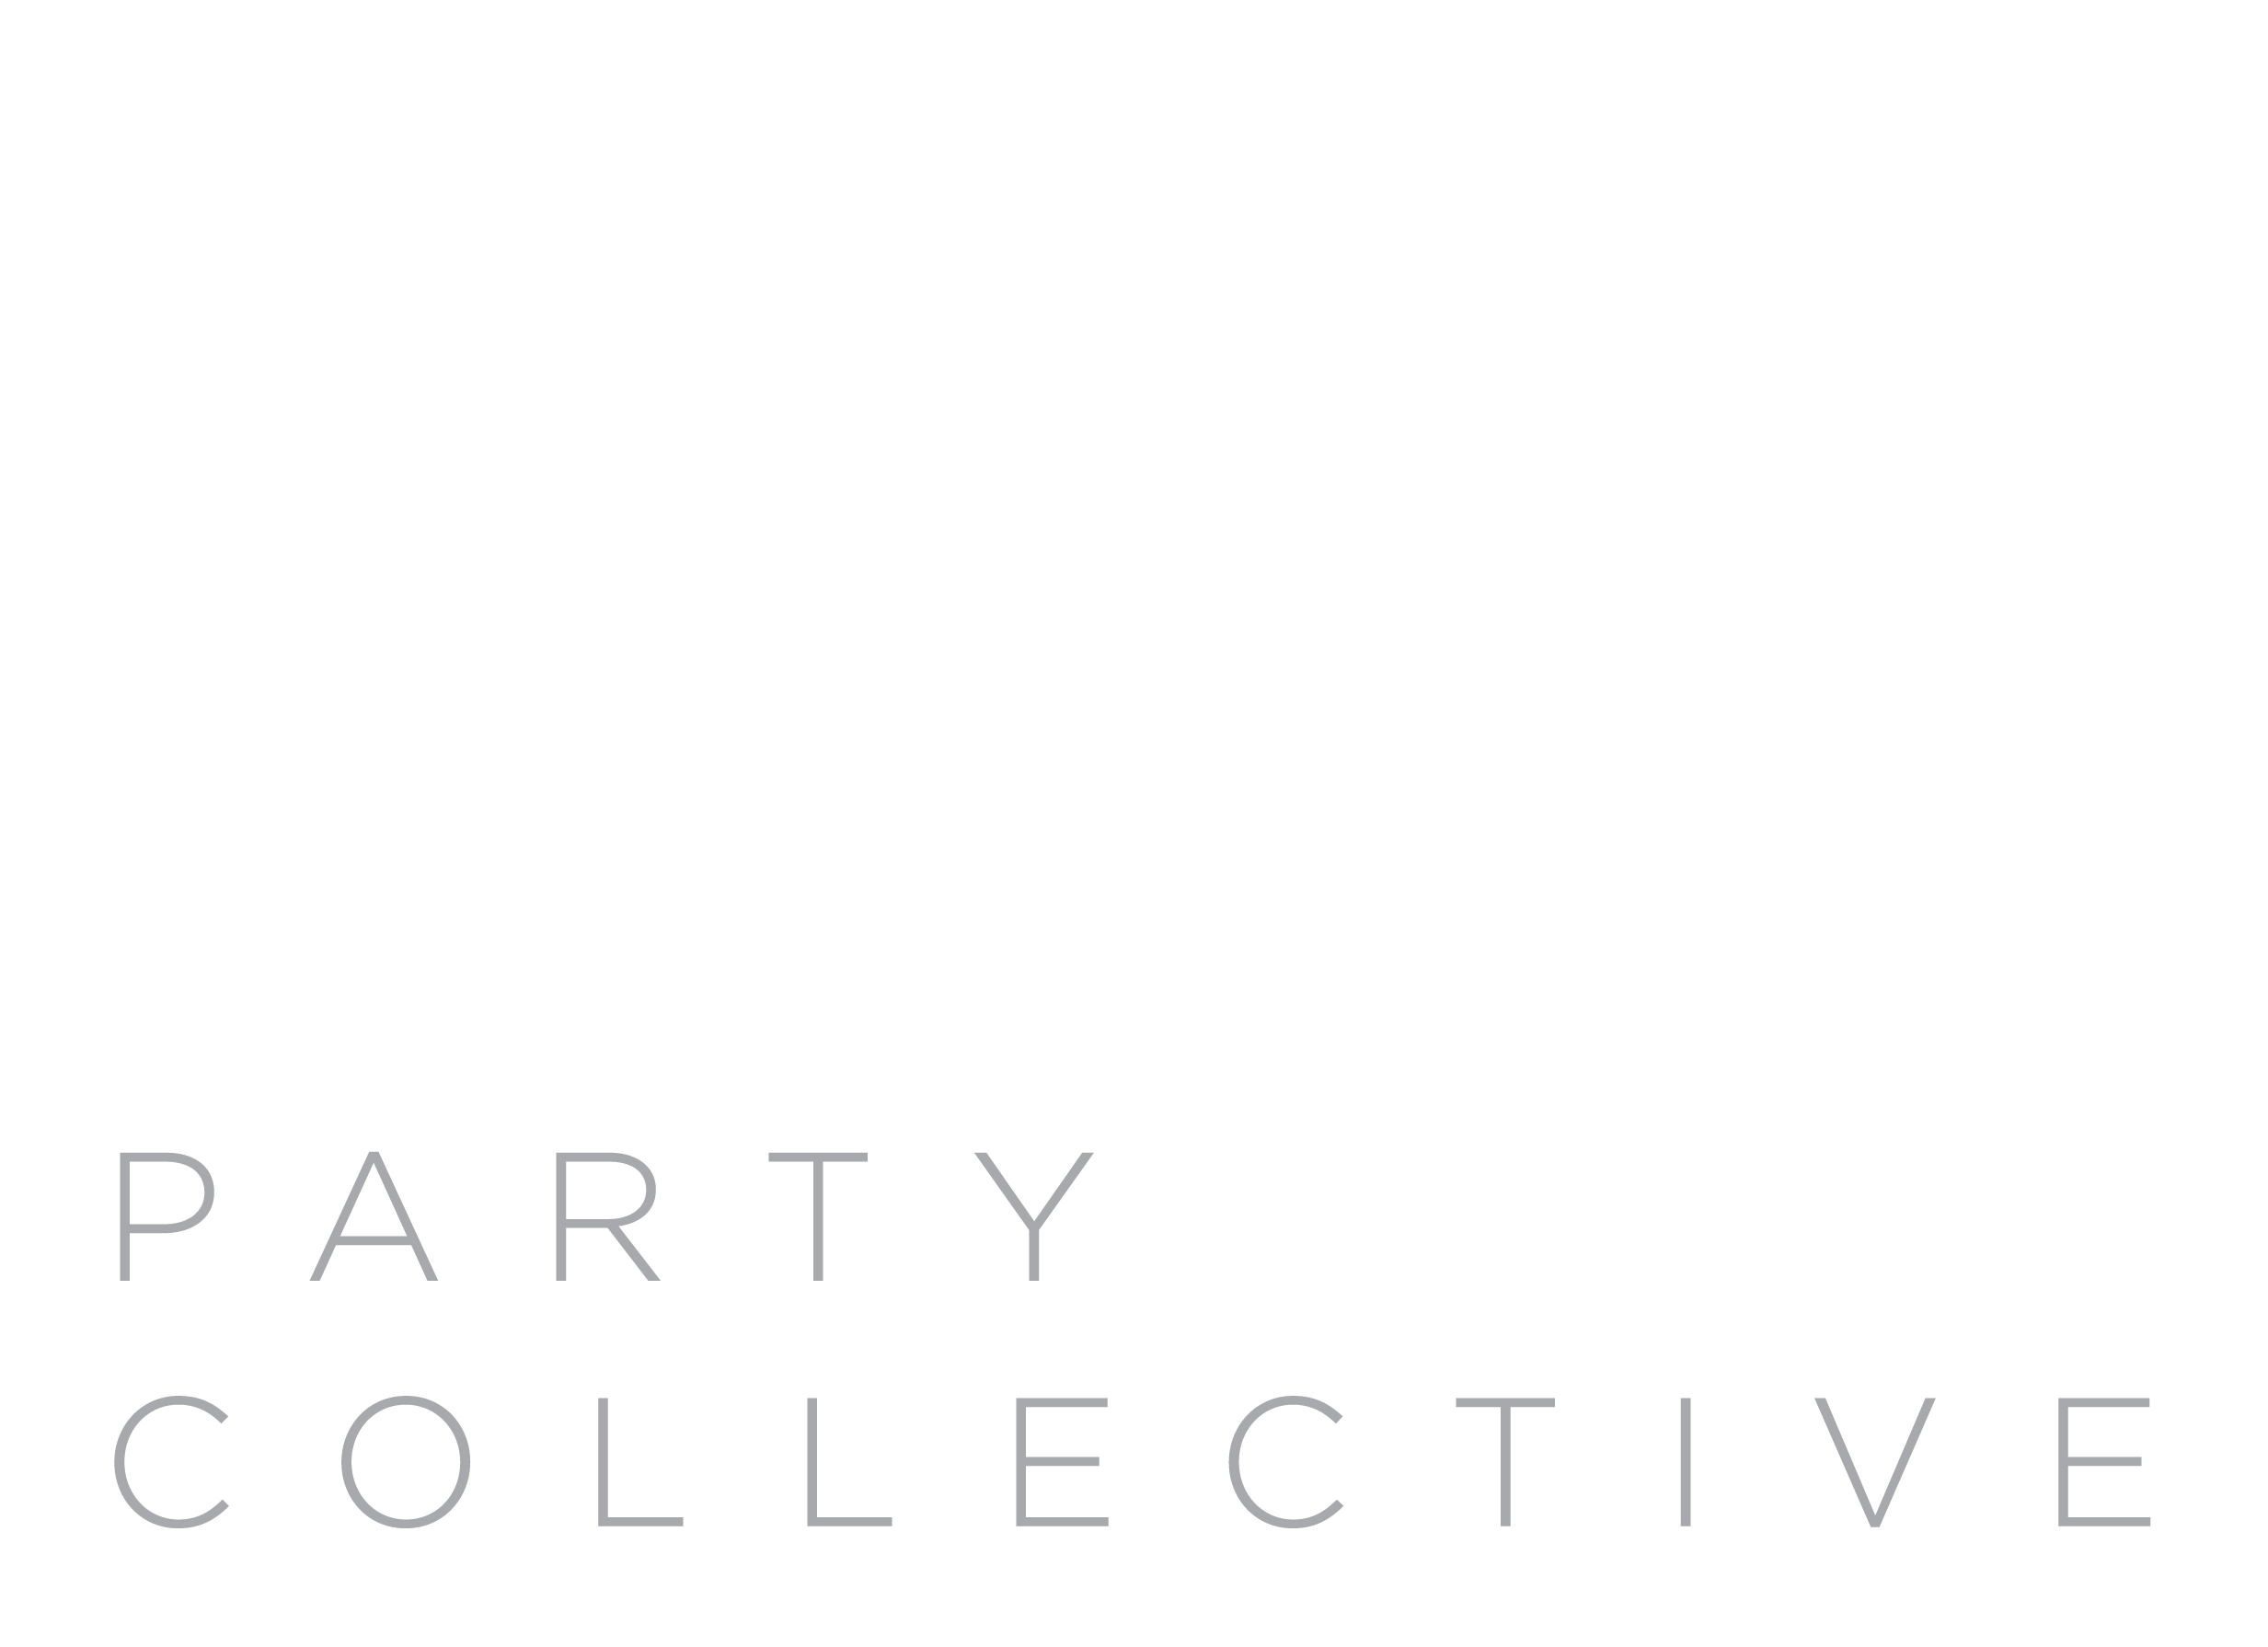 Hey! Party Collective